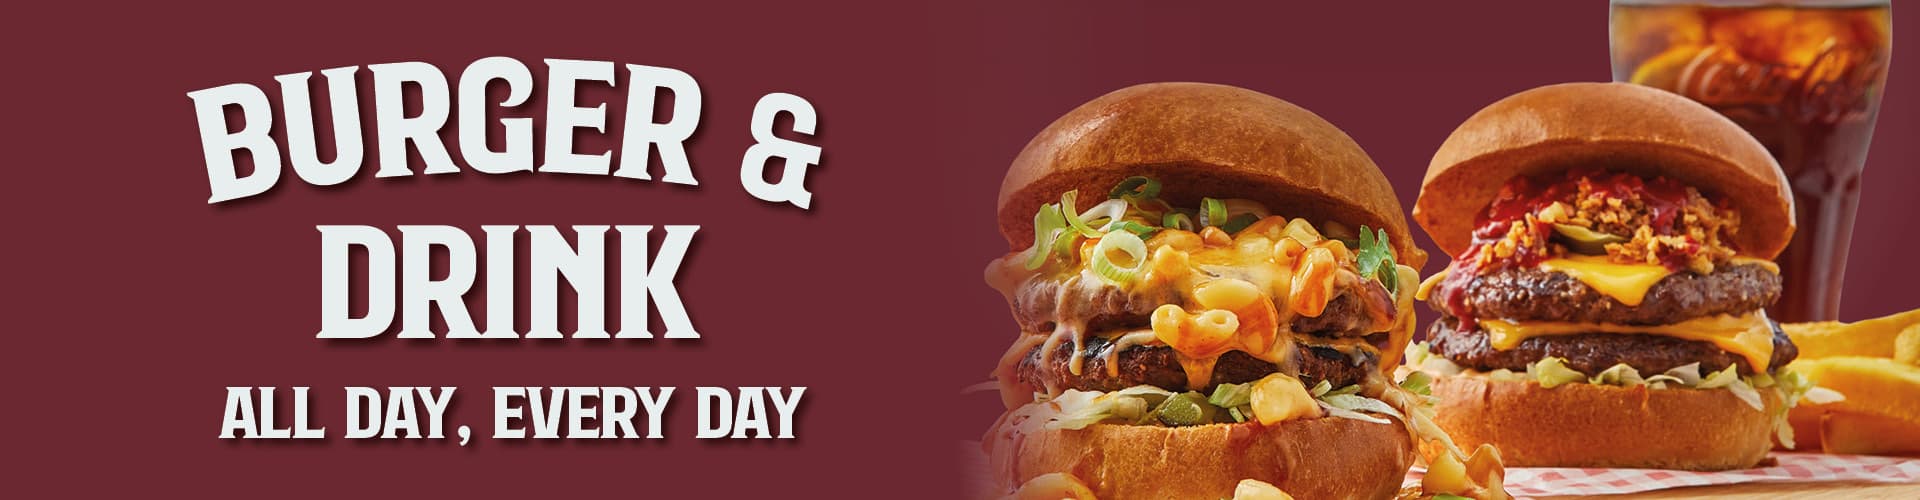 Burger & Drink at The King's Tap in Cheadle Hulme